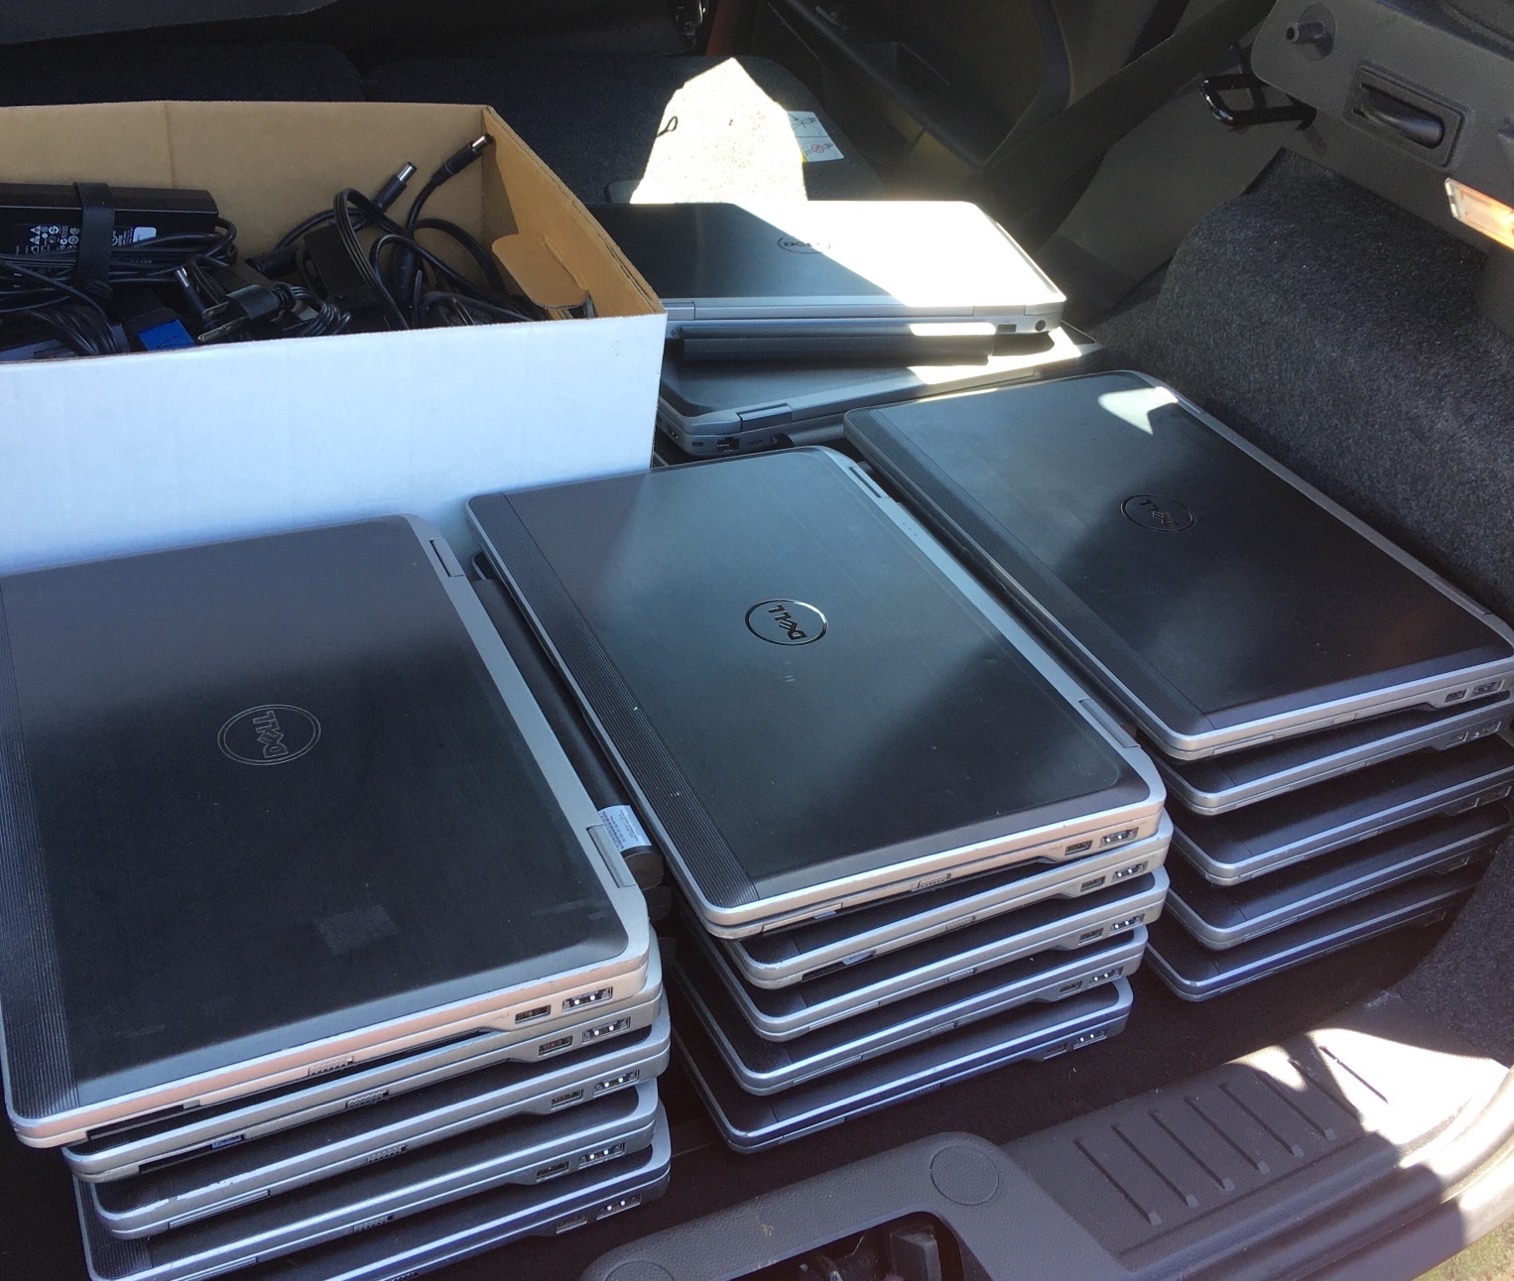 pile of laptops in back of vehicle